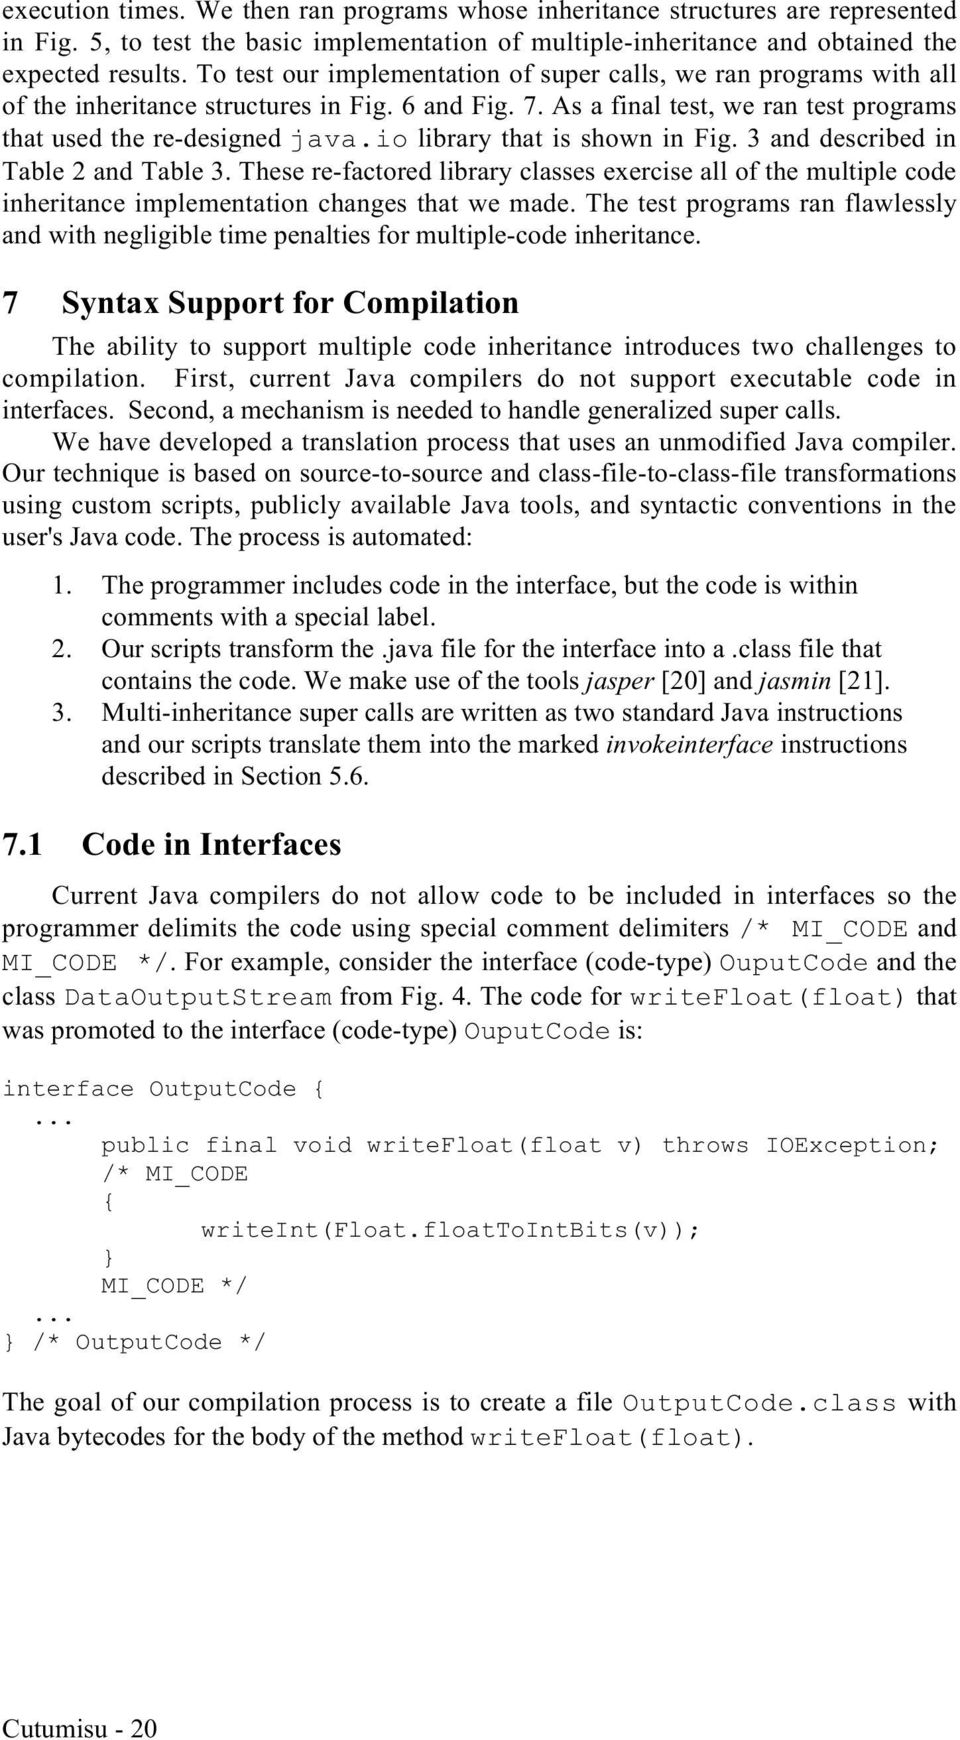 io library that is shown in Fig. 3 and described in Table 2 and Table 3. These re-factored library classes exercise all of the multiple code inheritance implementation changes that we made.